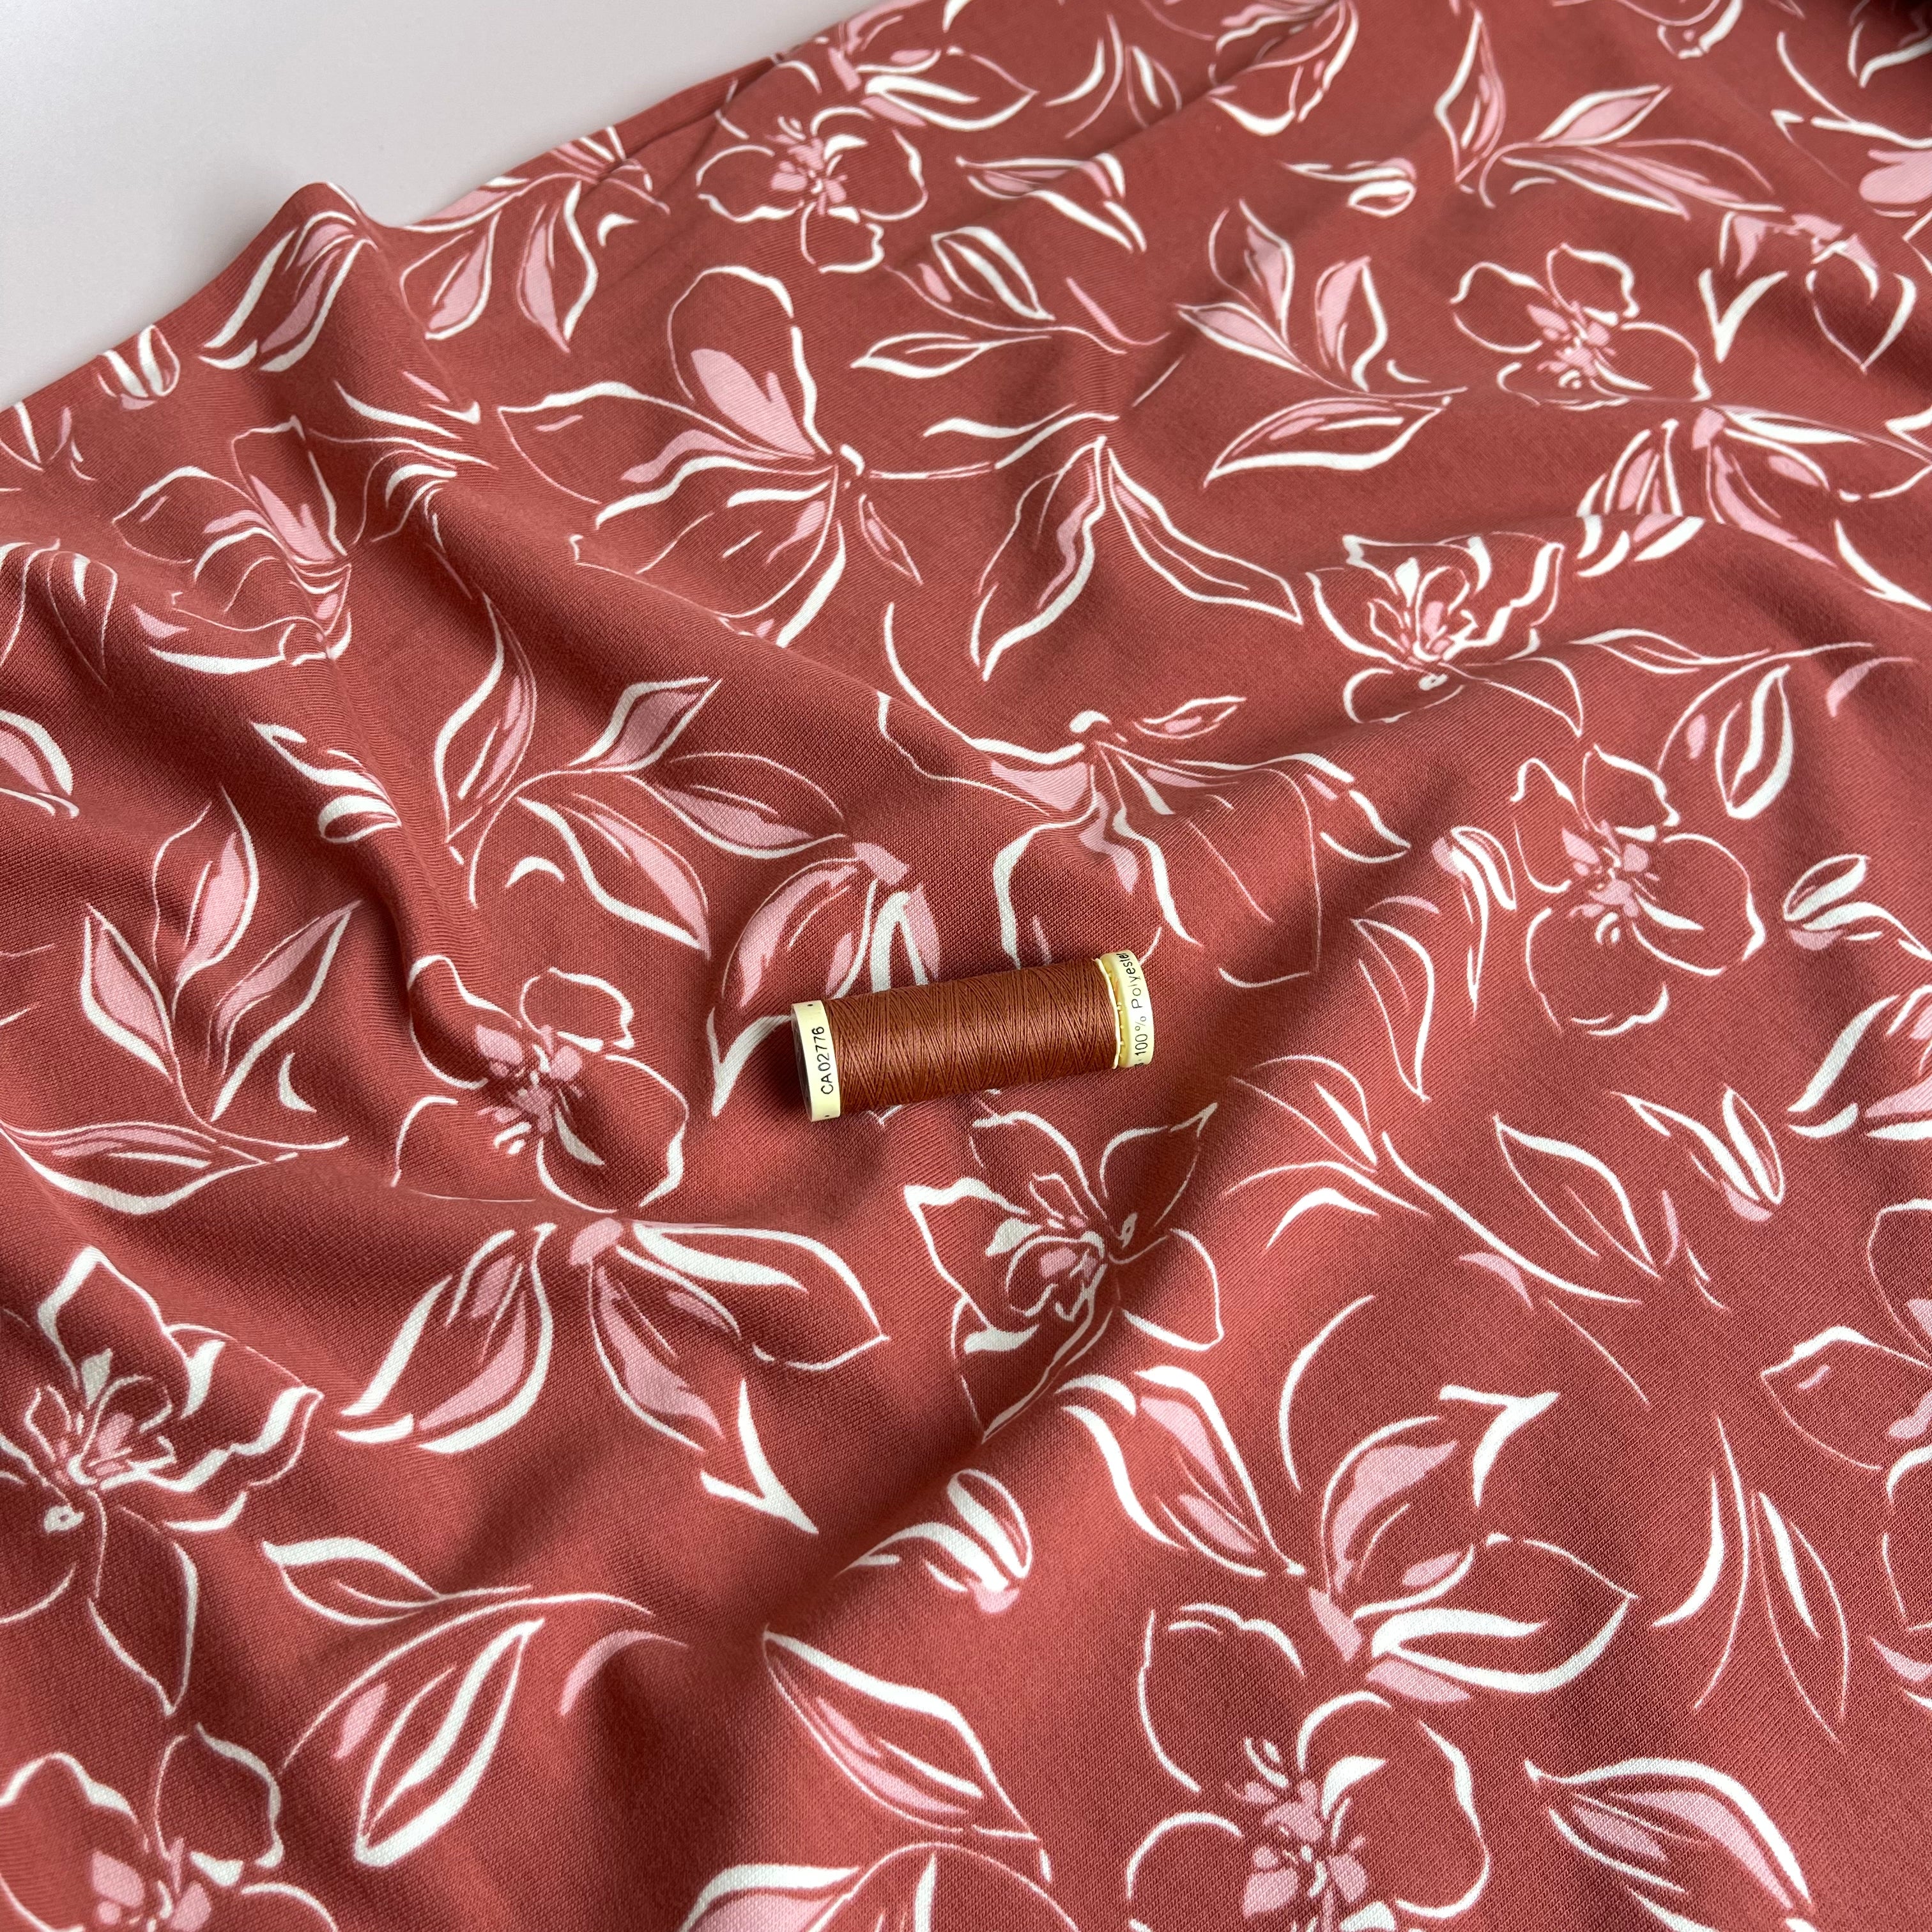 REMNANT 1.04 Metres - Line Flowers on Terracotta Recycled Cotton French Terry